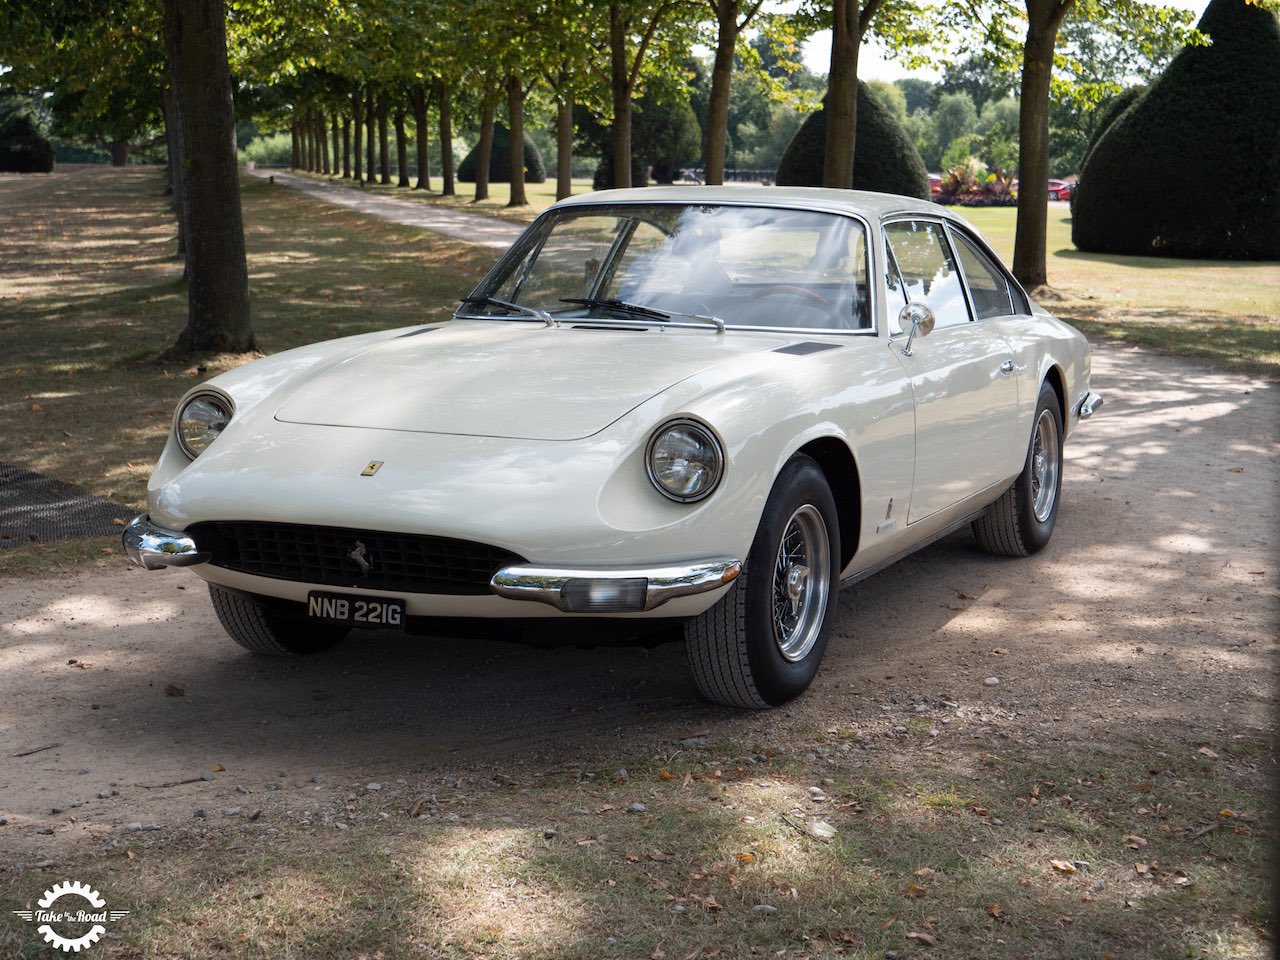 Quick Guide to Buying a Vintage Car: Tips and Considerations